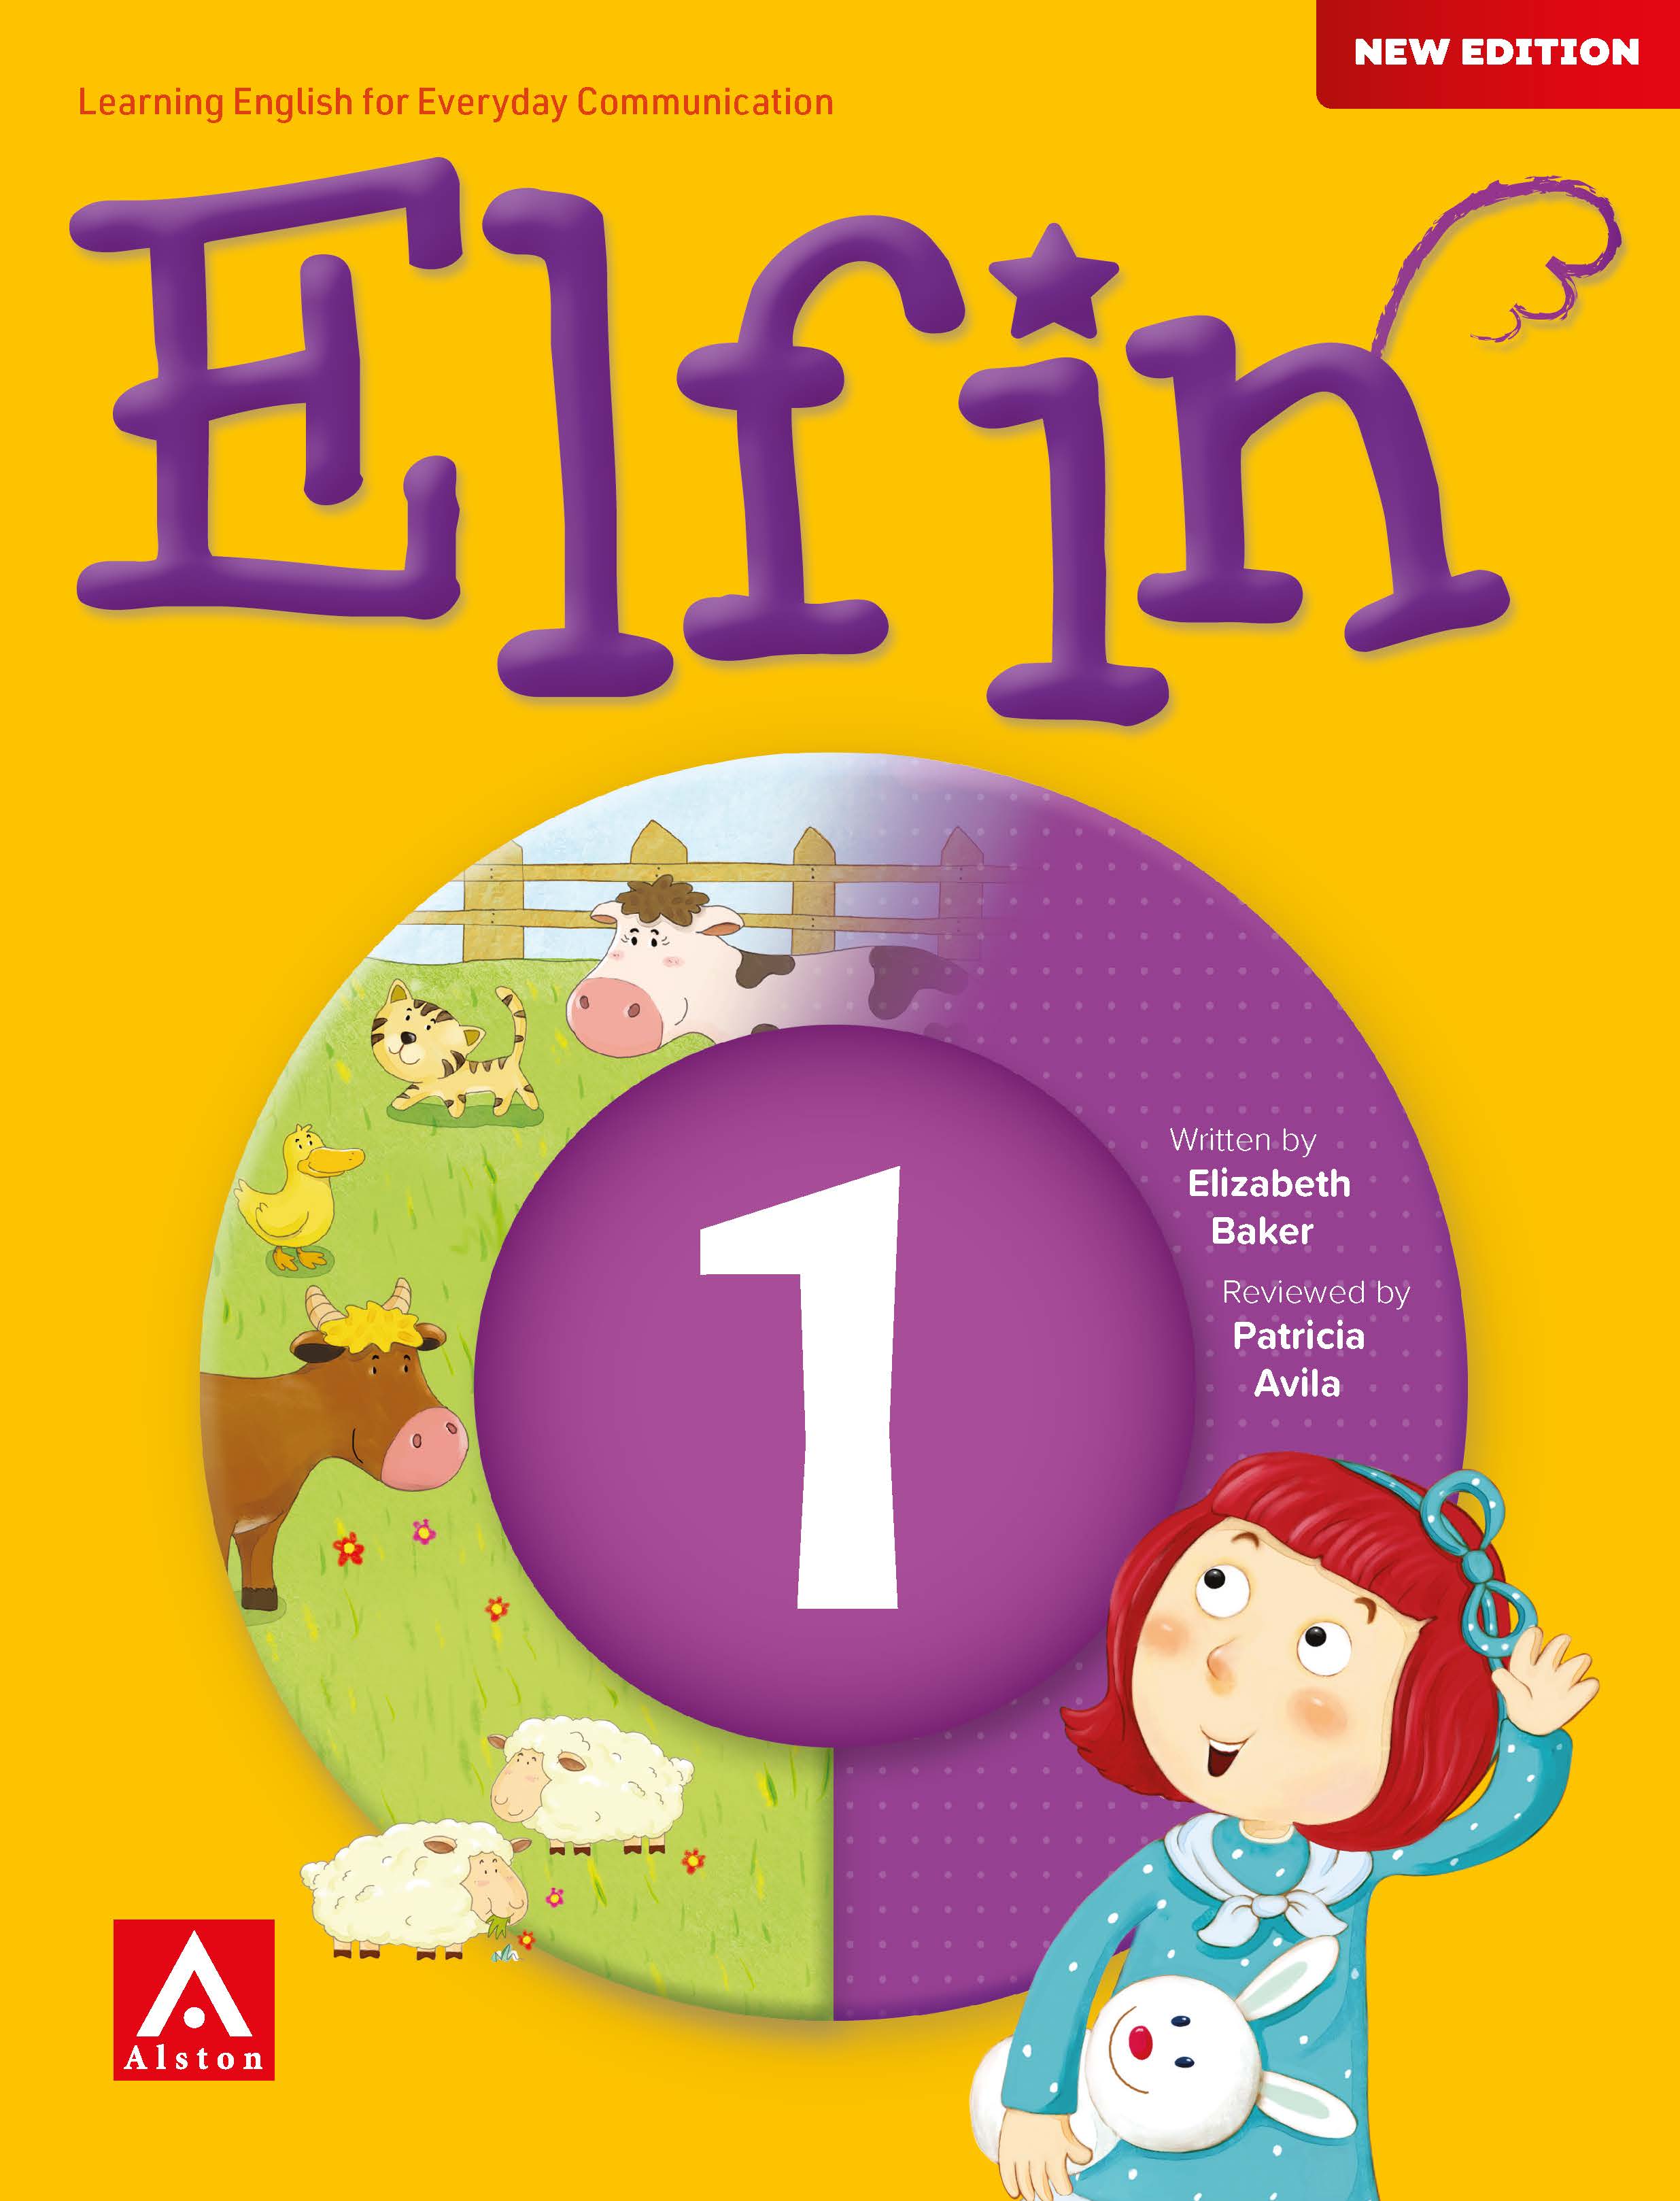 Elfin New Edition Cover SB TG 1 6 Page 01